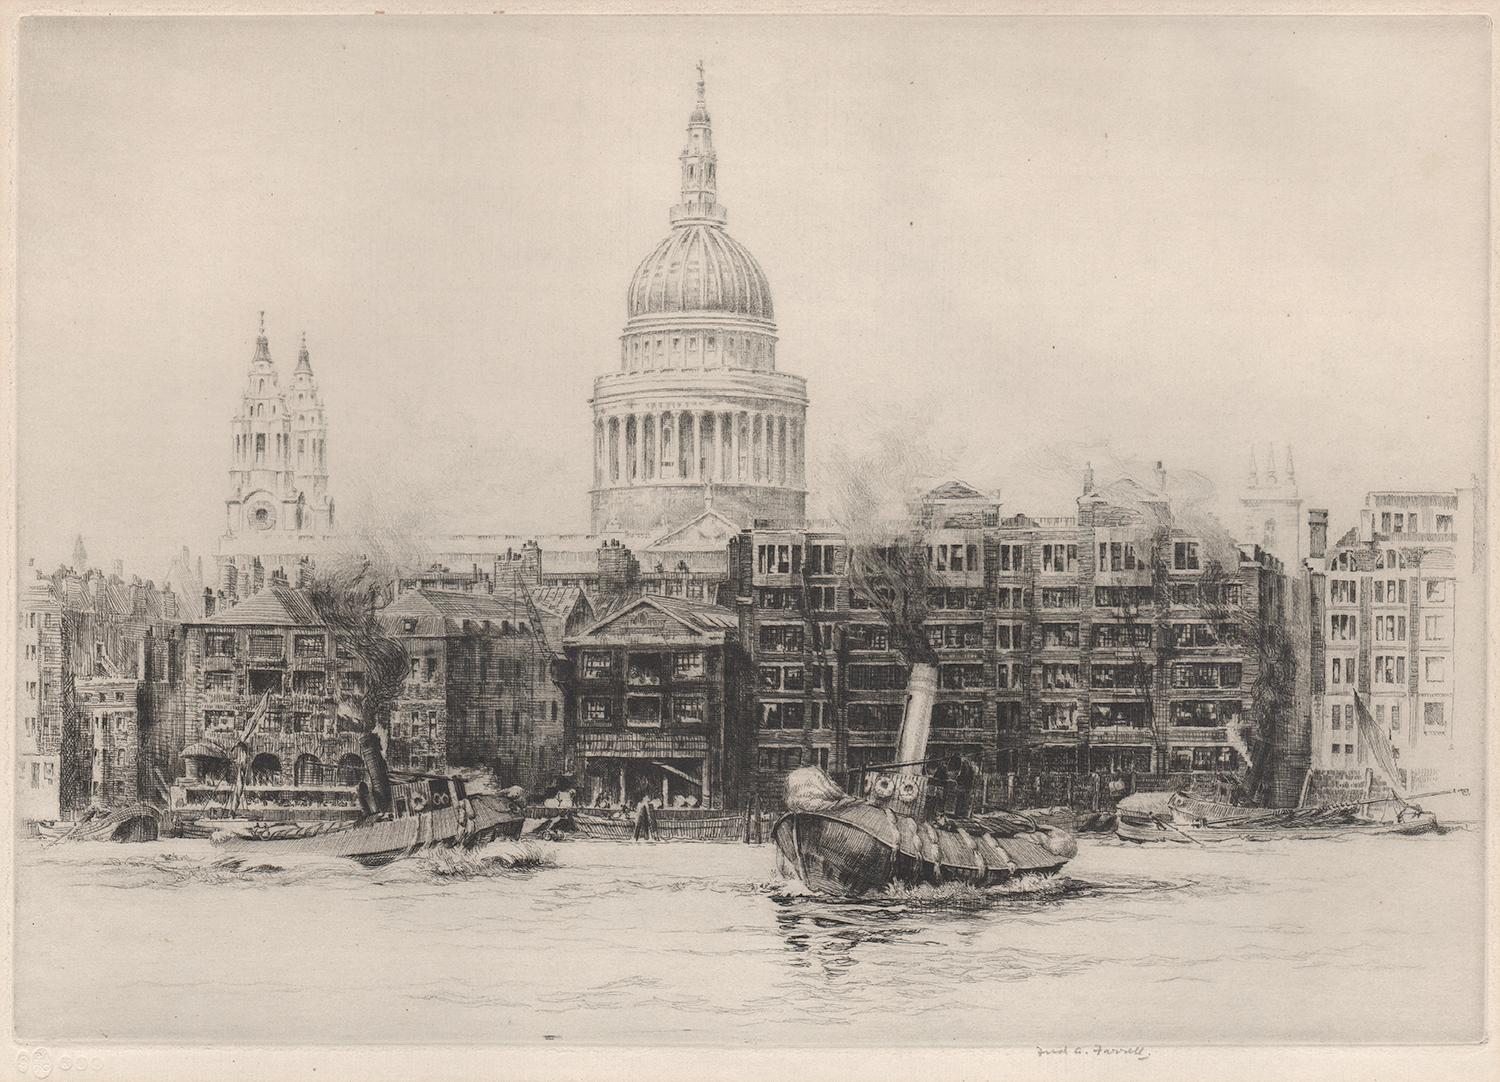 St Paul's Cathedral, Thames, London, etching by Frederick Farrell, circa 1920